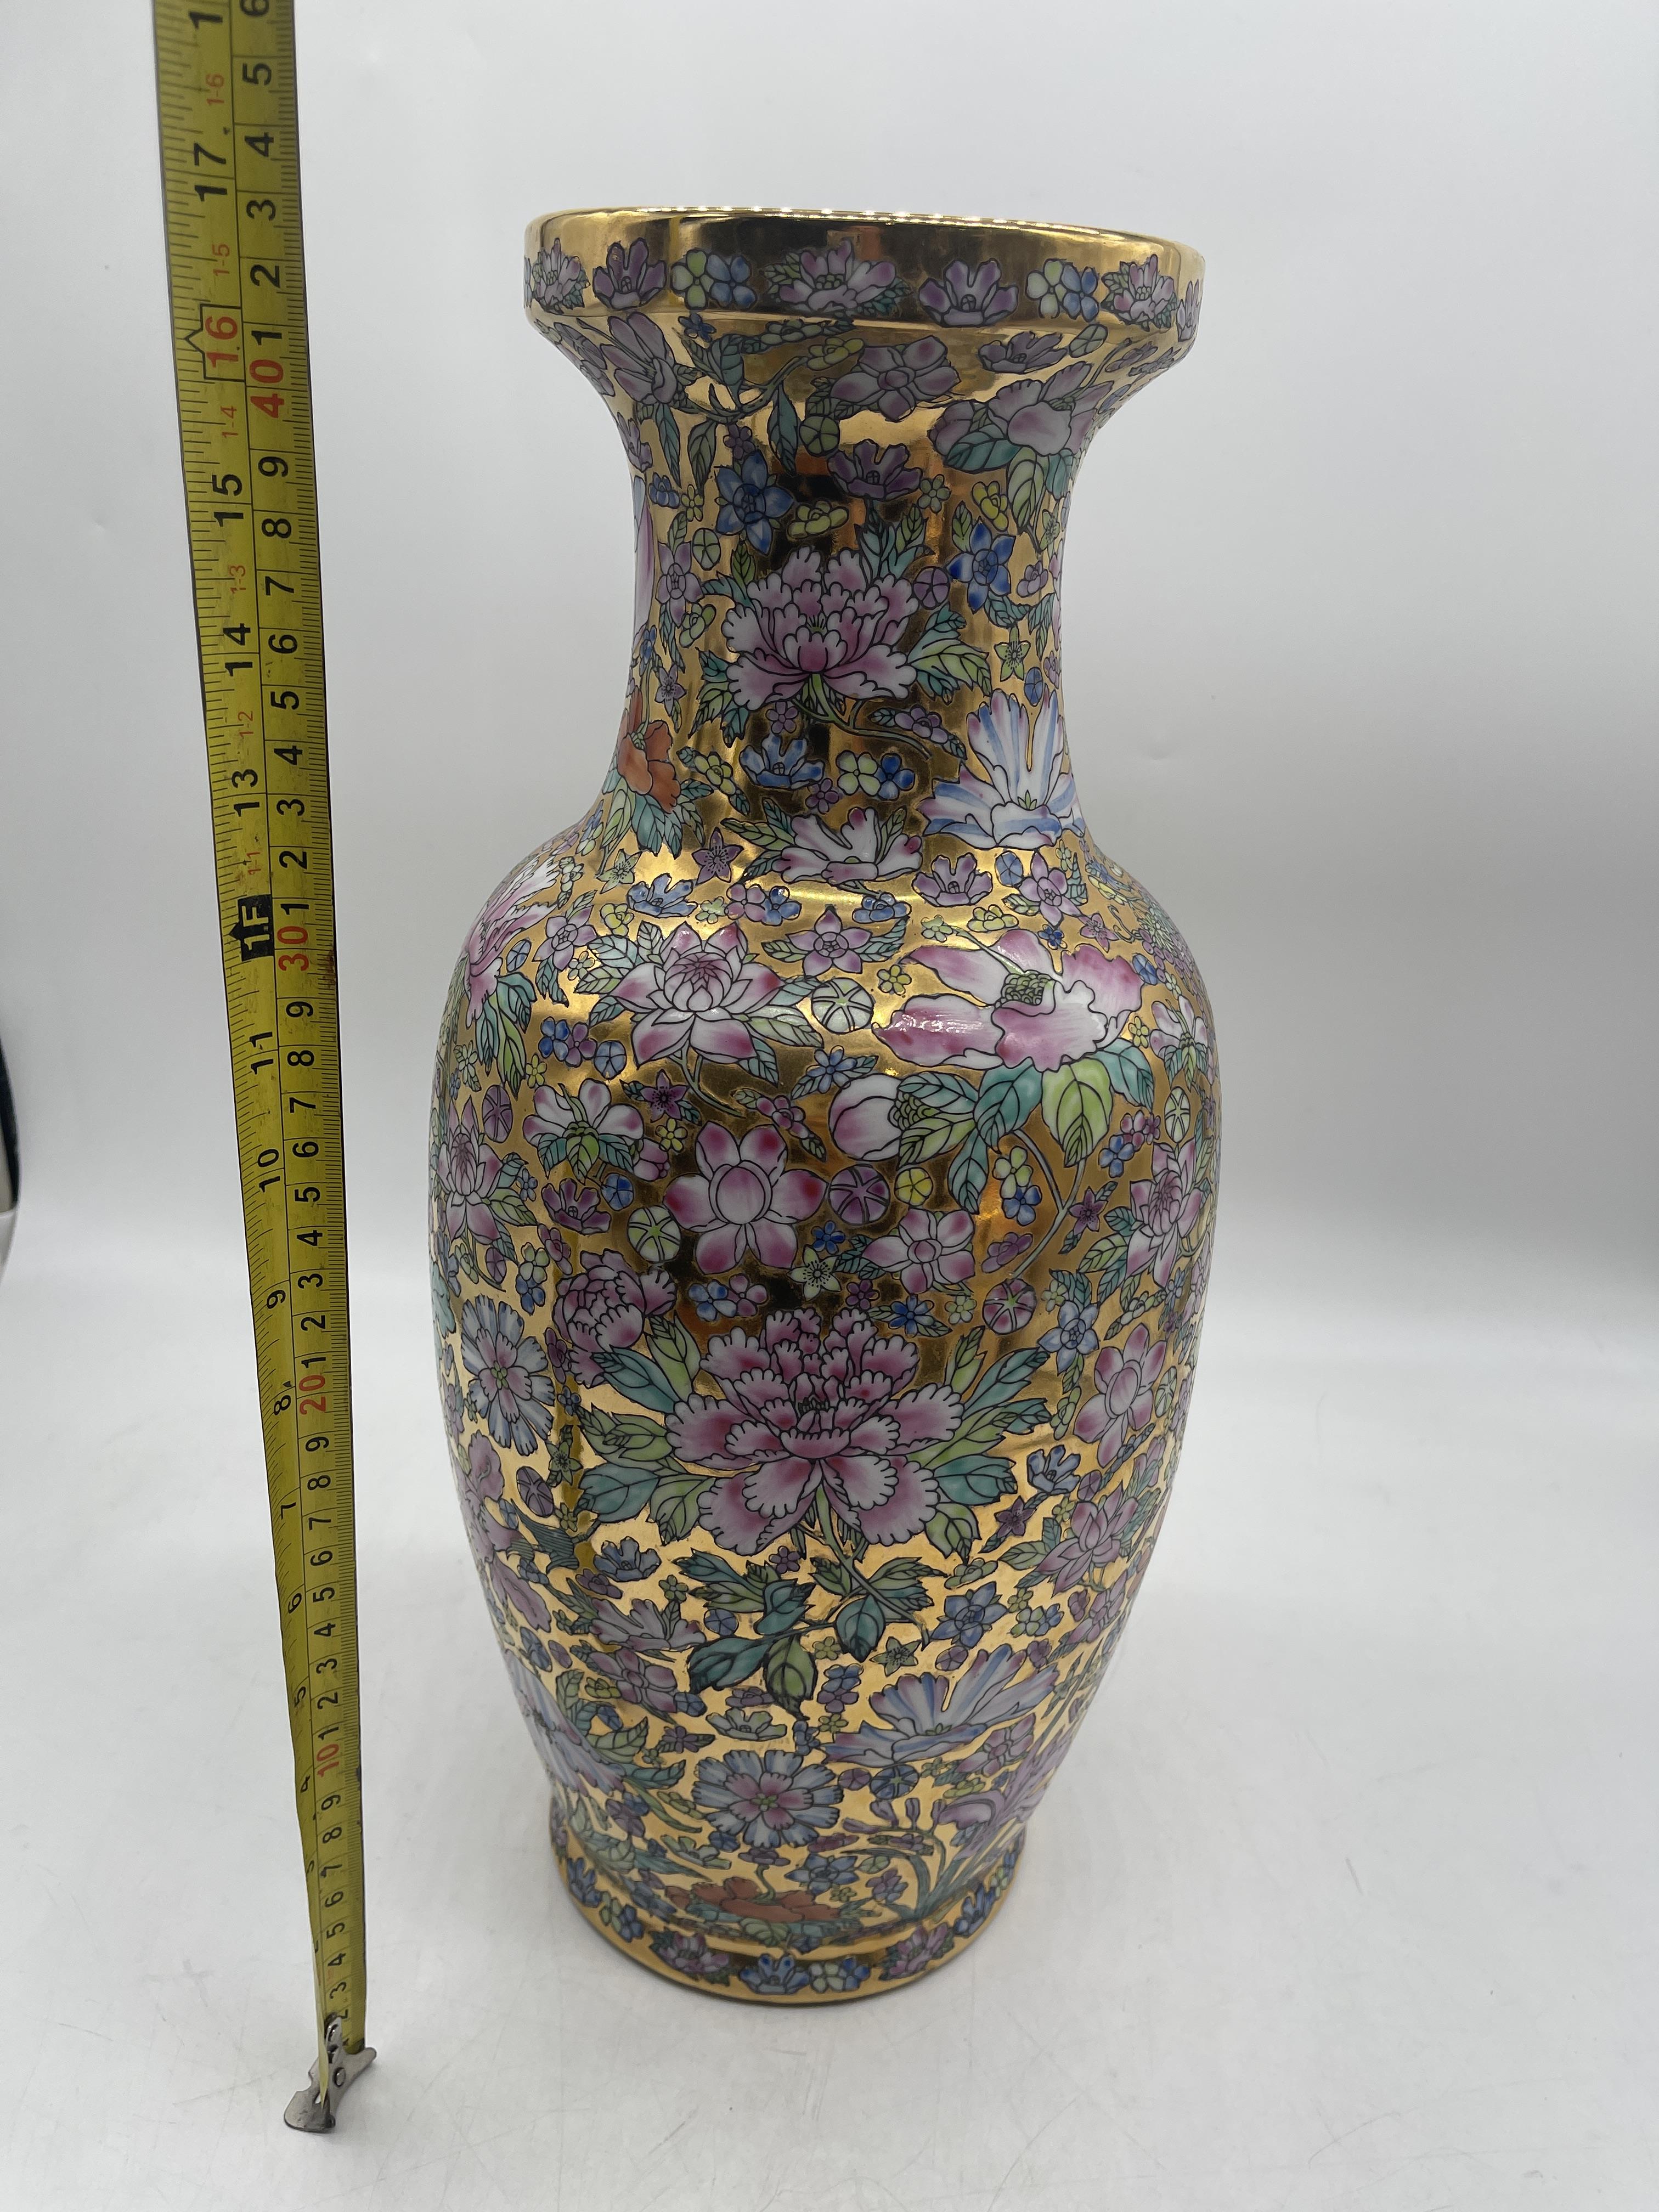 Chinese Floral Decorative Vase and Japanese Satsum - Image 8 of 21